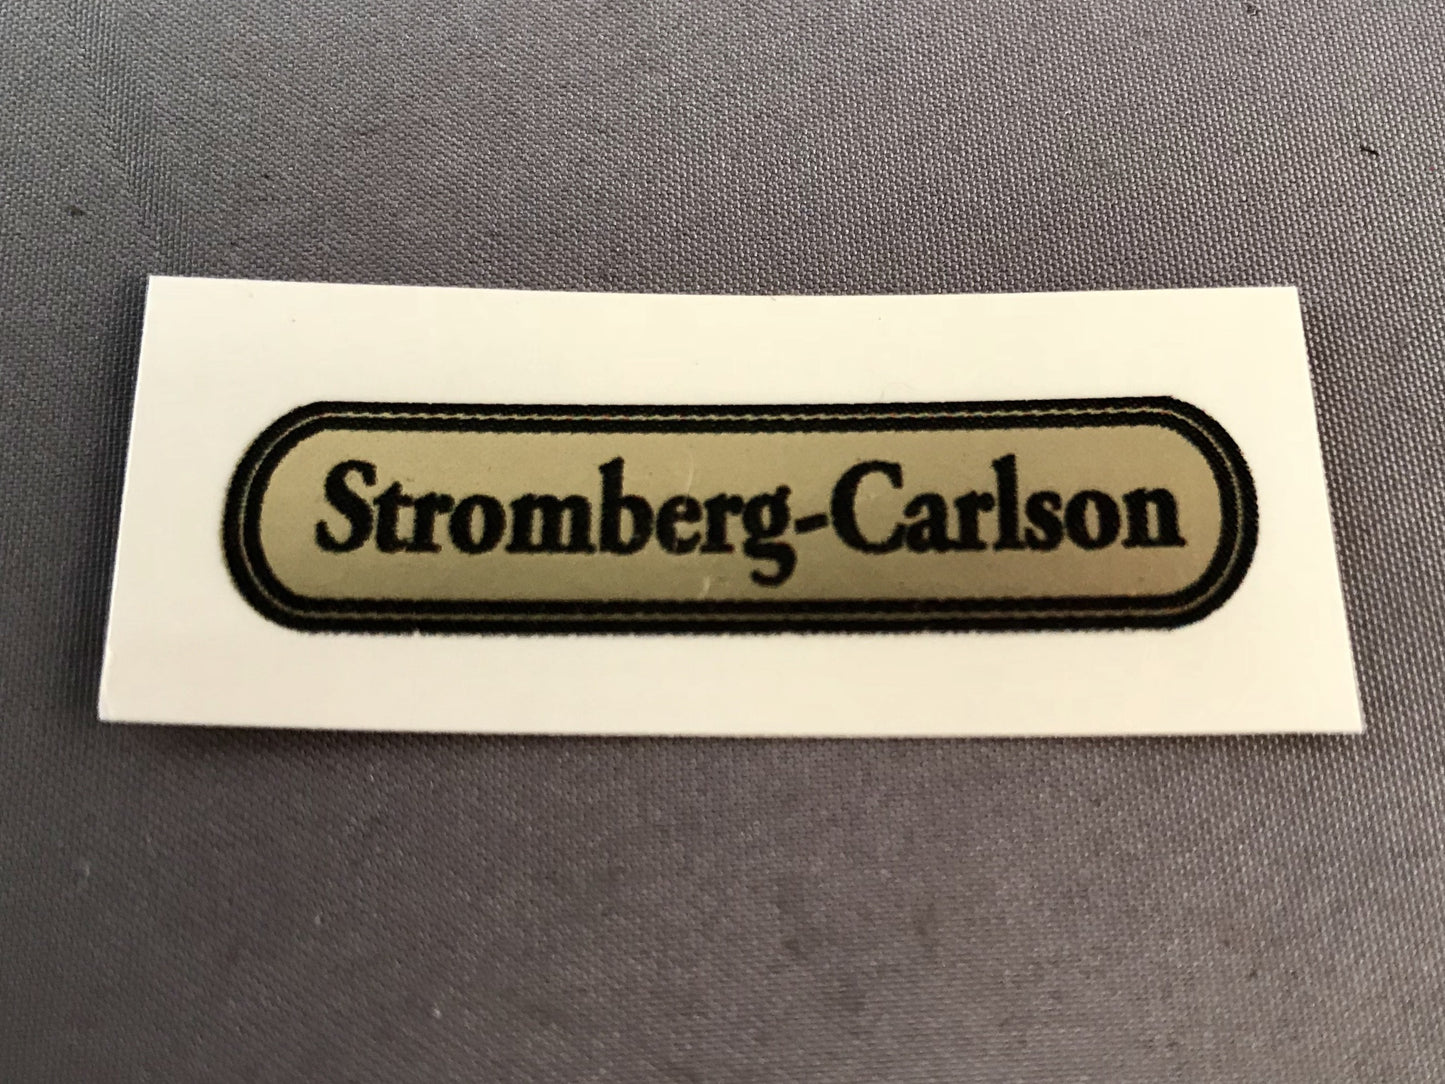 Water Decal - Stromberg-Carlson - 3/8"x1.5"